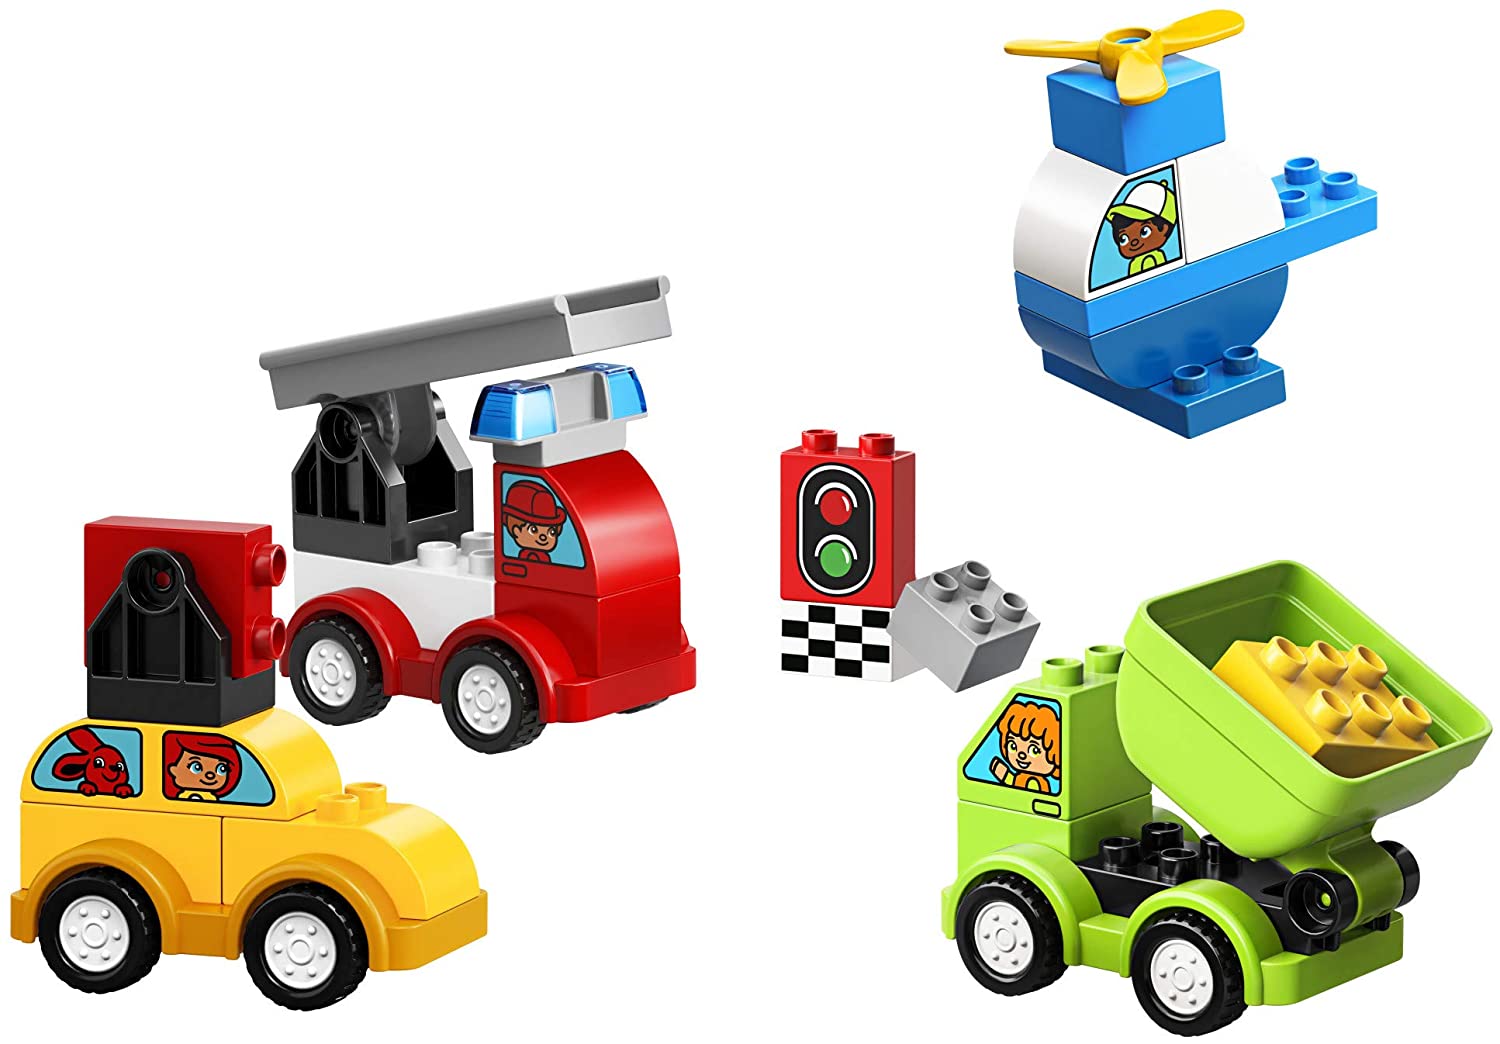  LEGO DUPLO My First Car Creations 10886 Building Blocks (34  Pieces) : Toys & Games